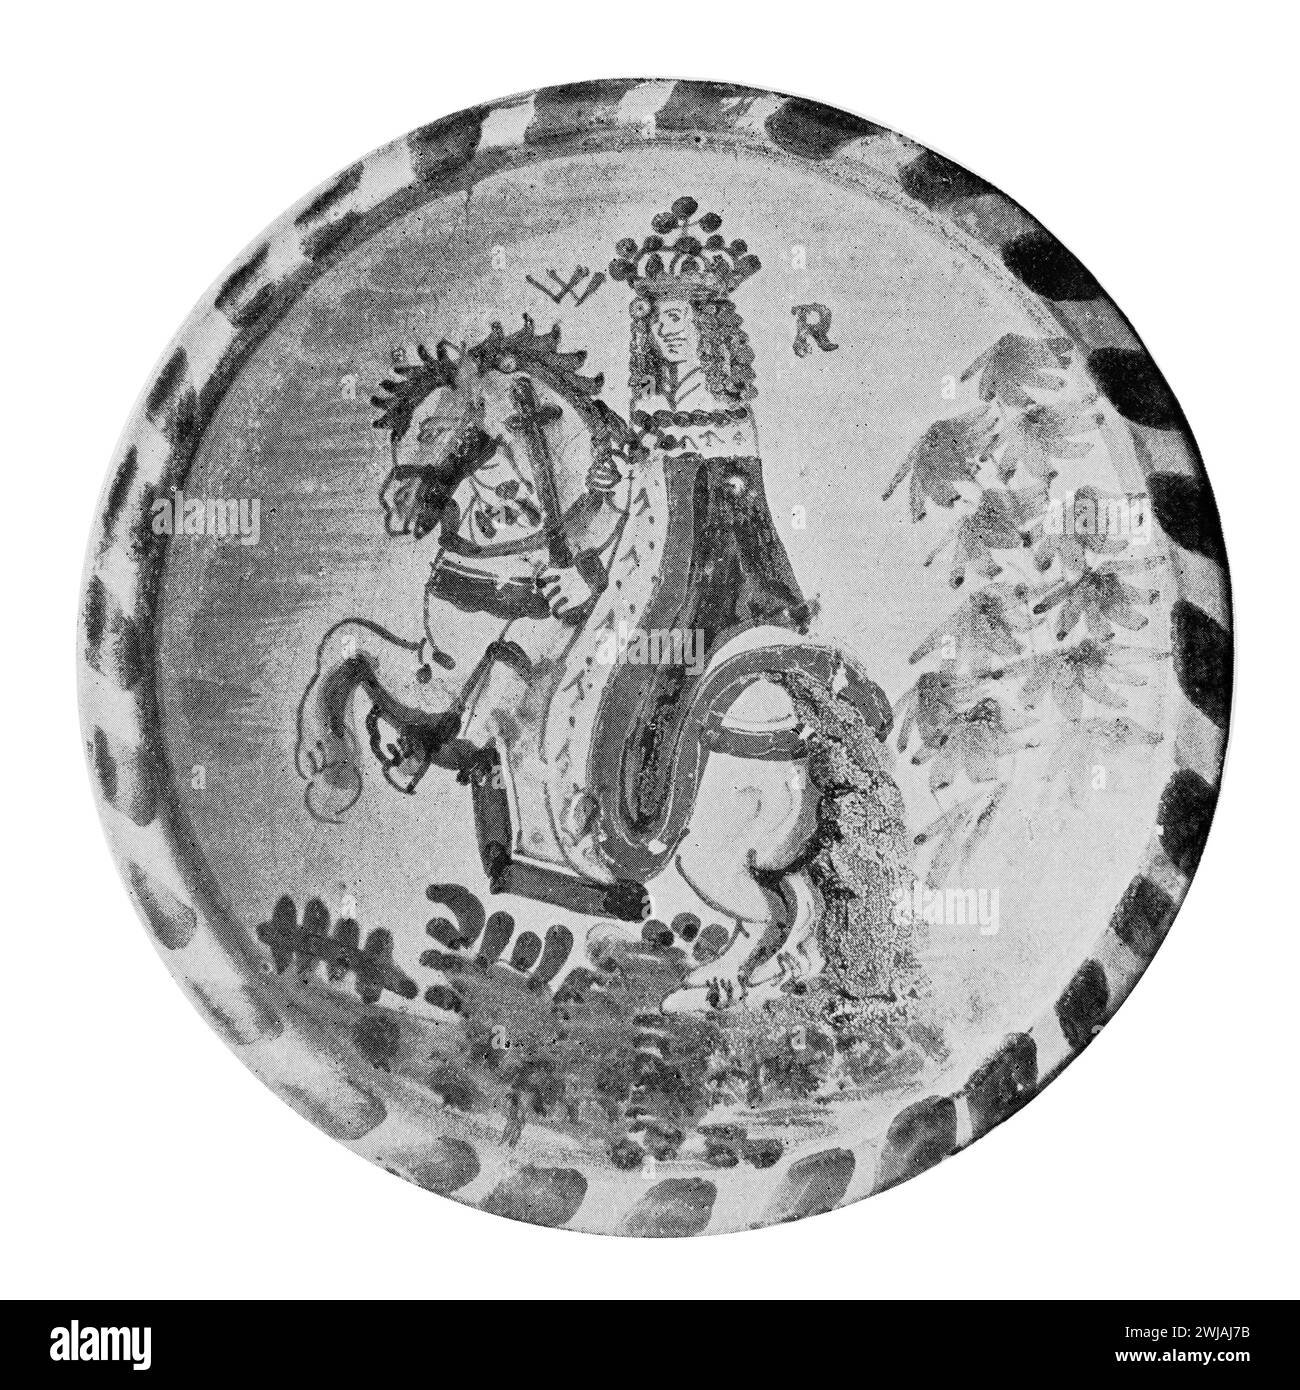 An old English Delft plate with a painting of William III of England (William of Orange). 17th century. Black and White Illustration from the Connoisseur, an Illustrated Magazine for Collectors Voll 3 (May-Aug 1902) published in London. Stock Photo